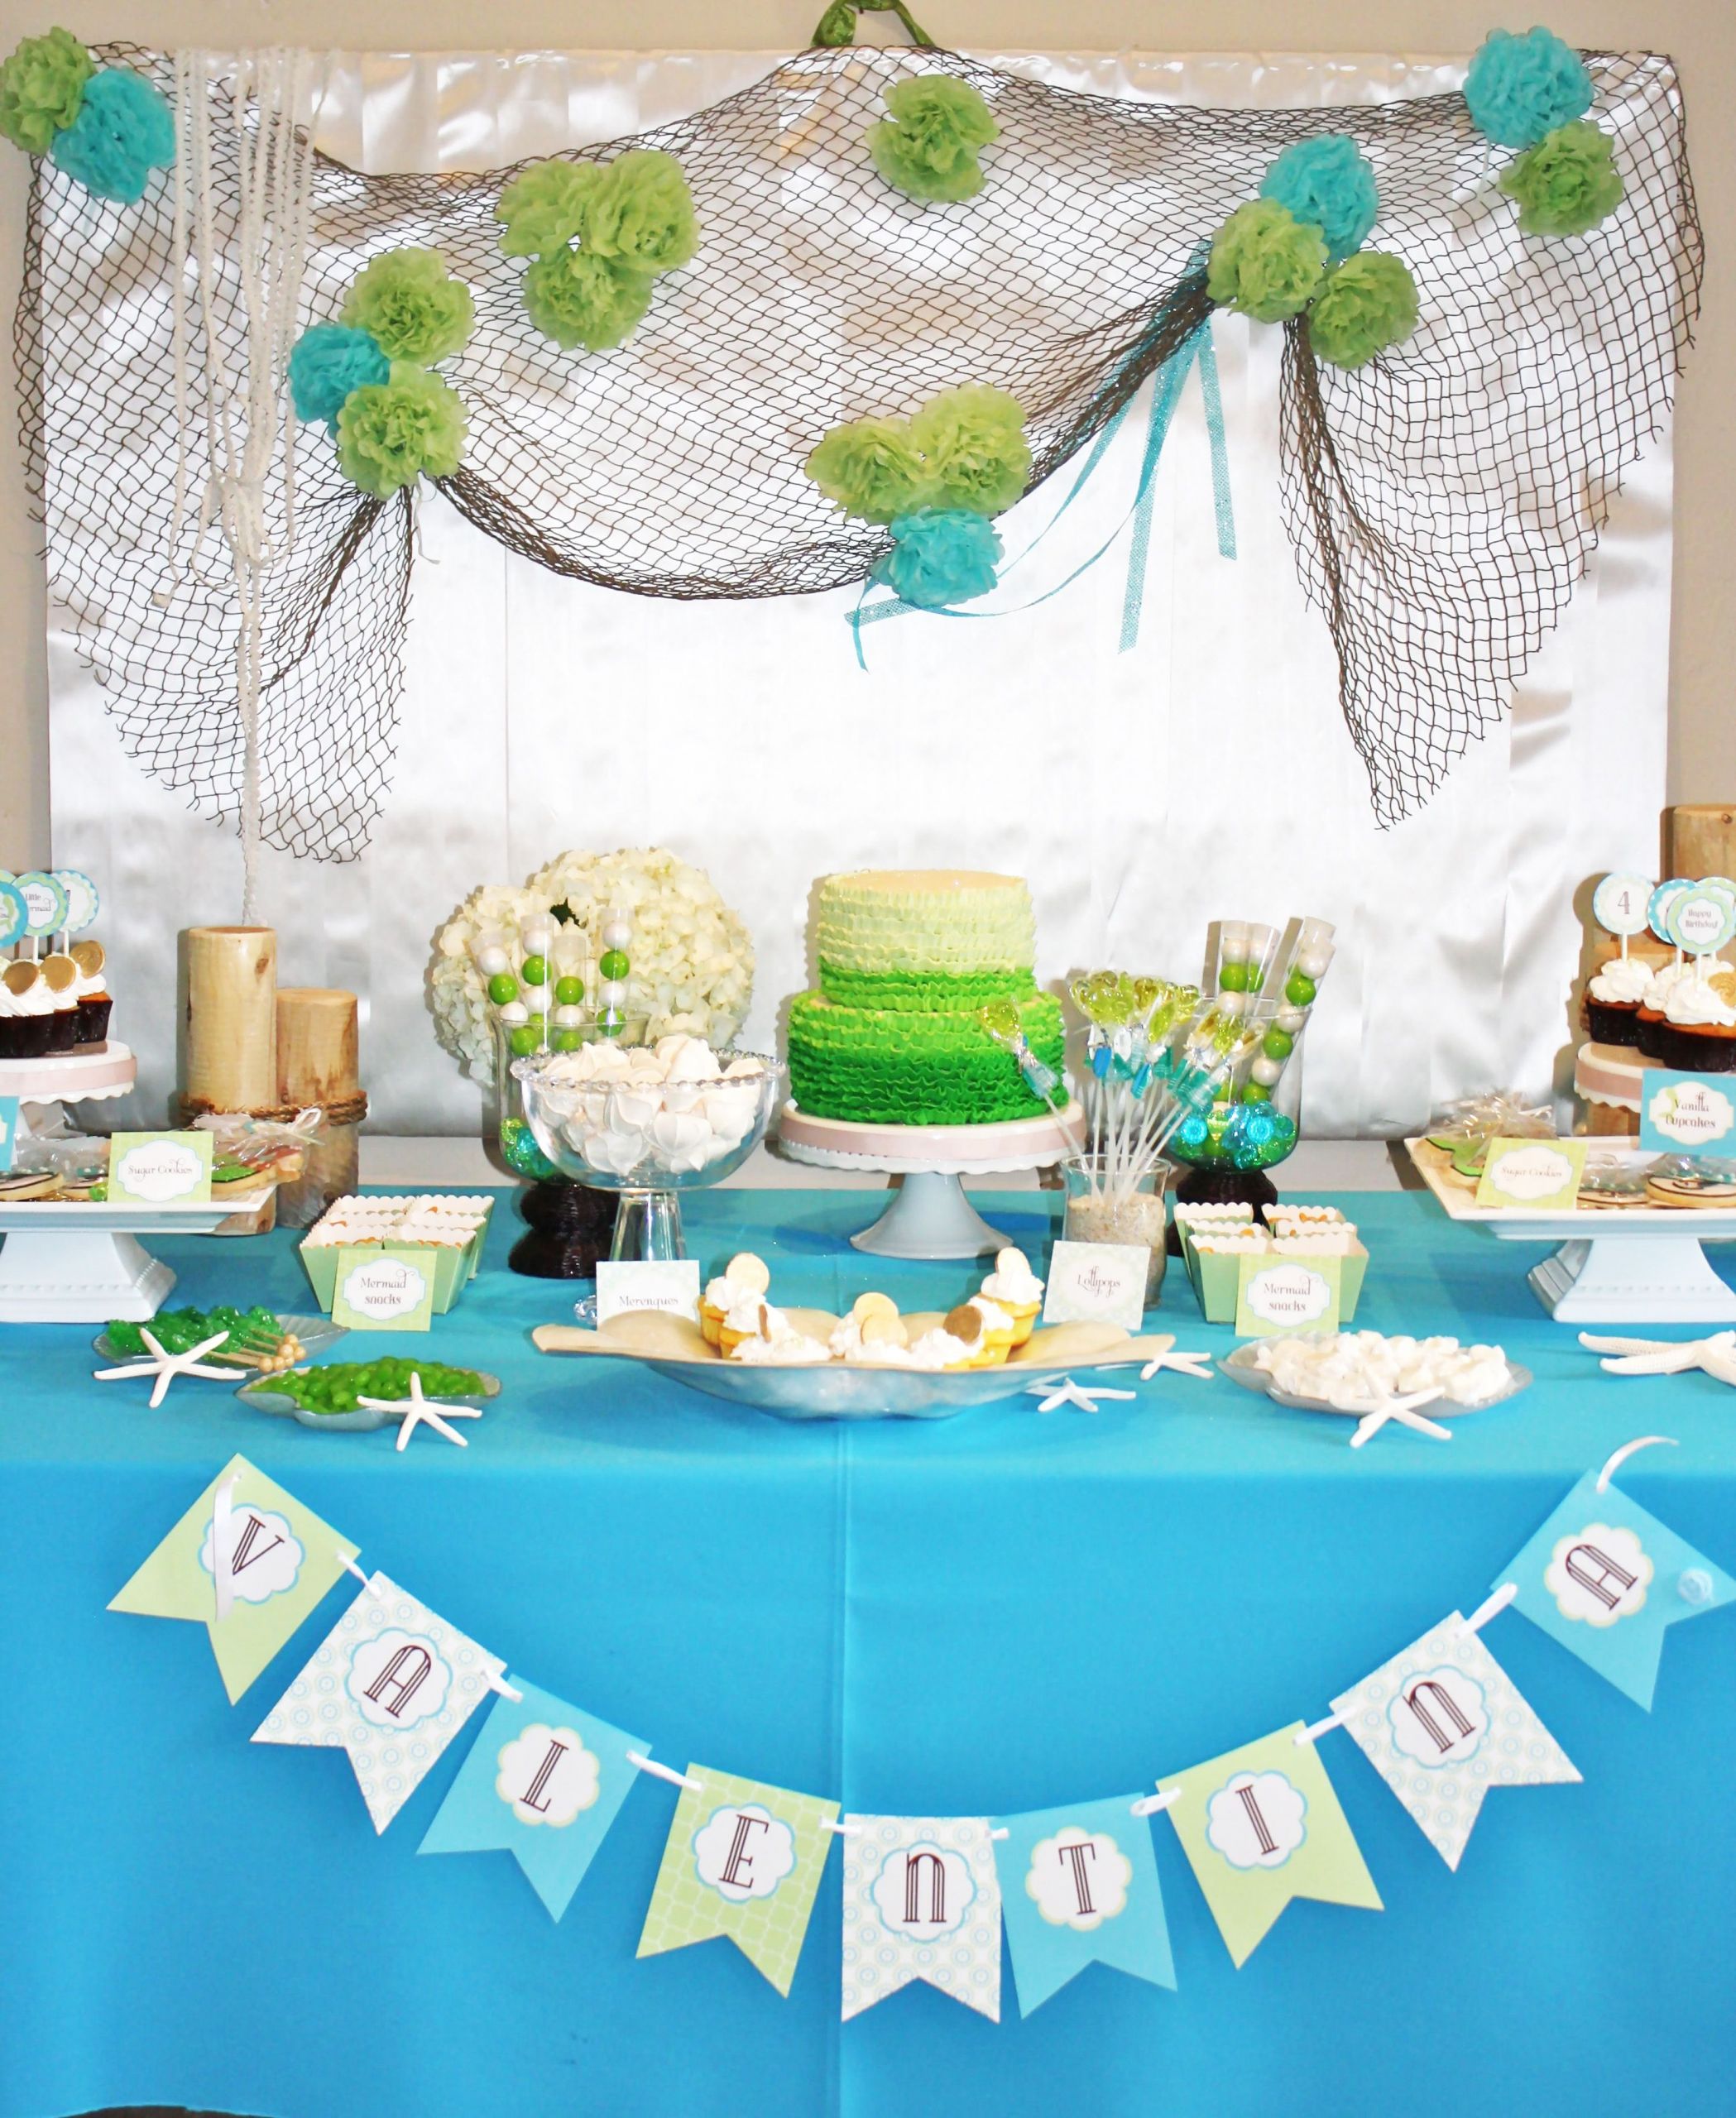 Mermaid And Pirate Party Ideas
 mermaid pirate party